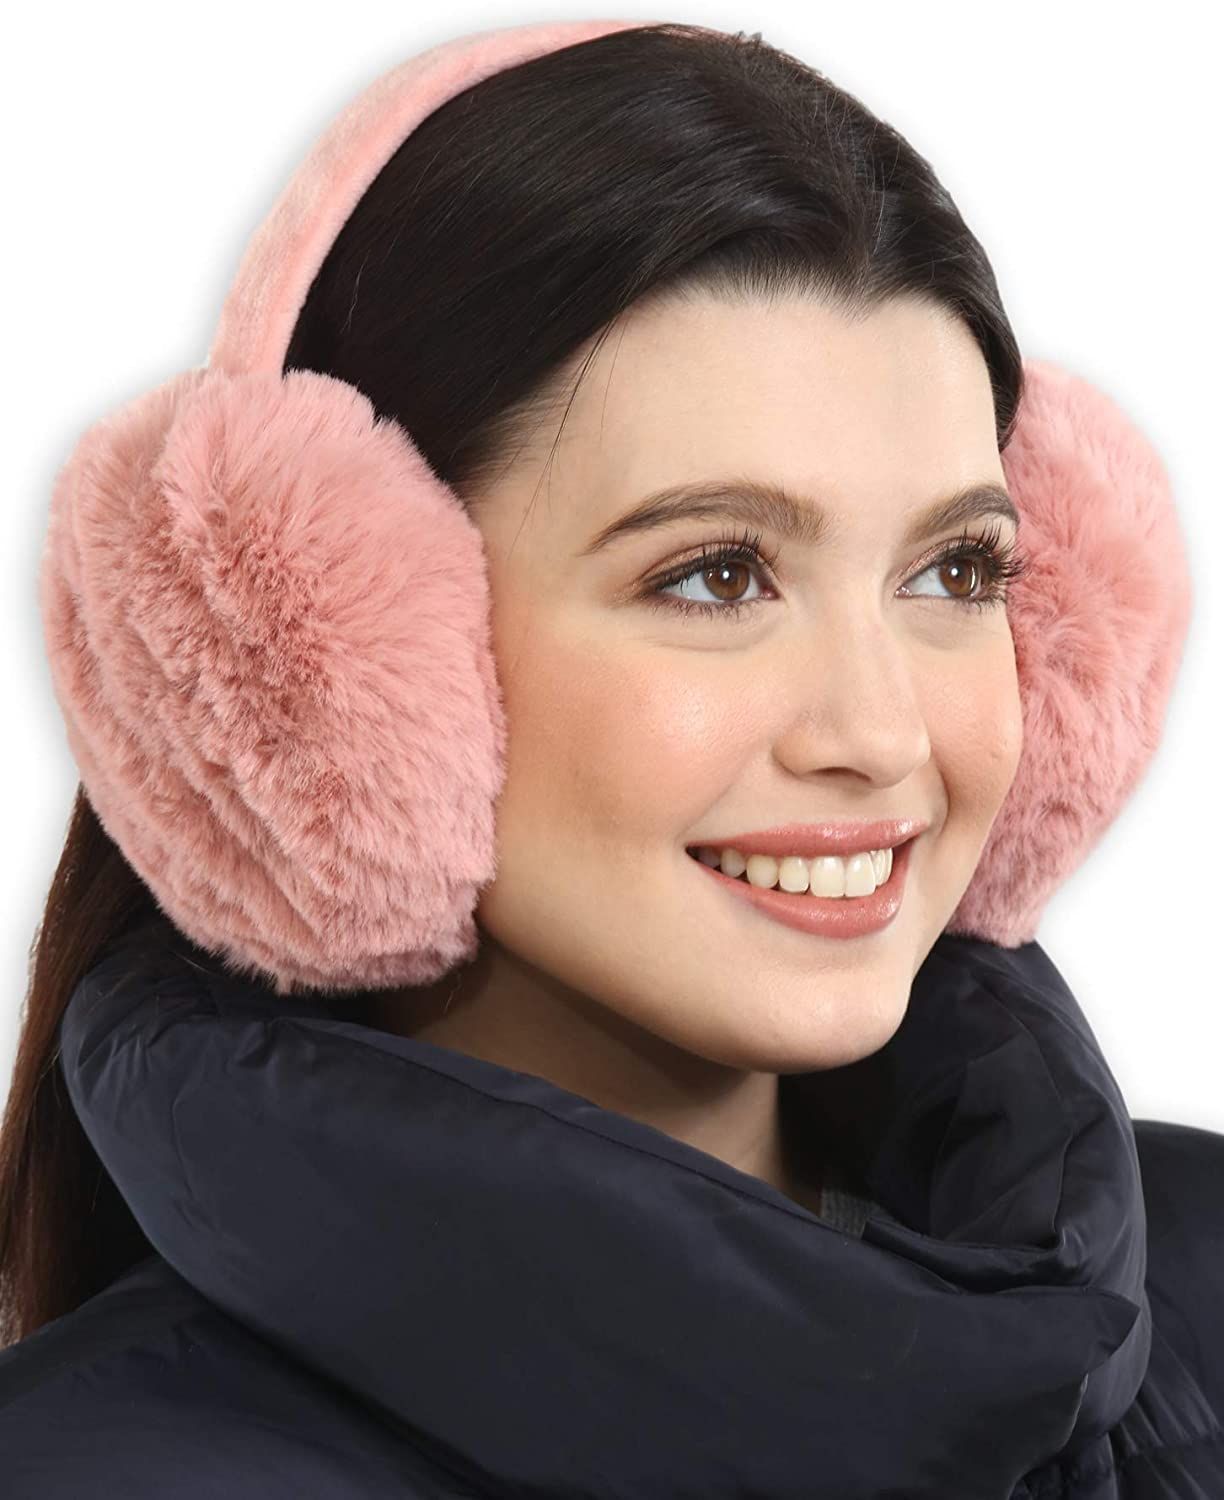 Adjustable foldable wind and water resistant outdoor behind the head ear warmers for men and women Ultra light earmuffs with reflector 